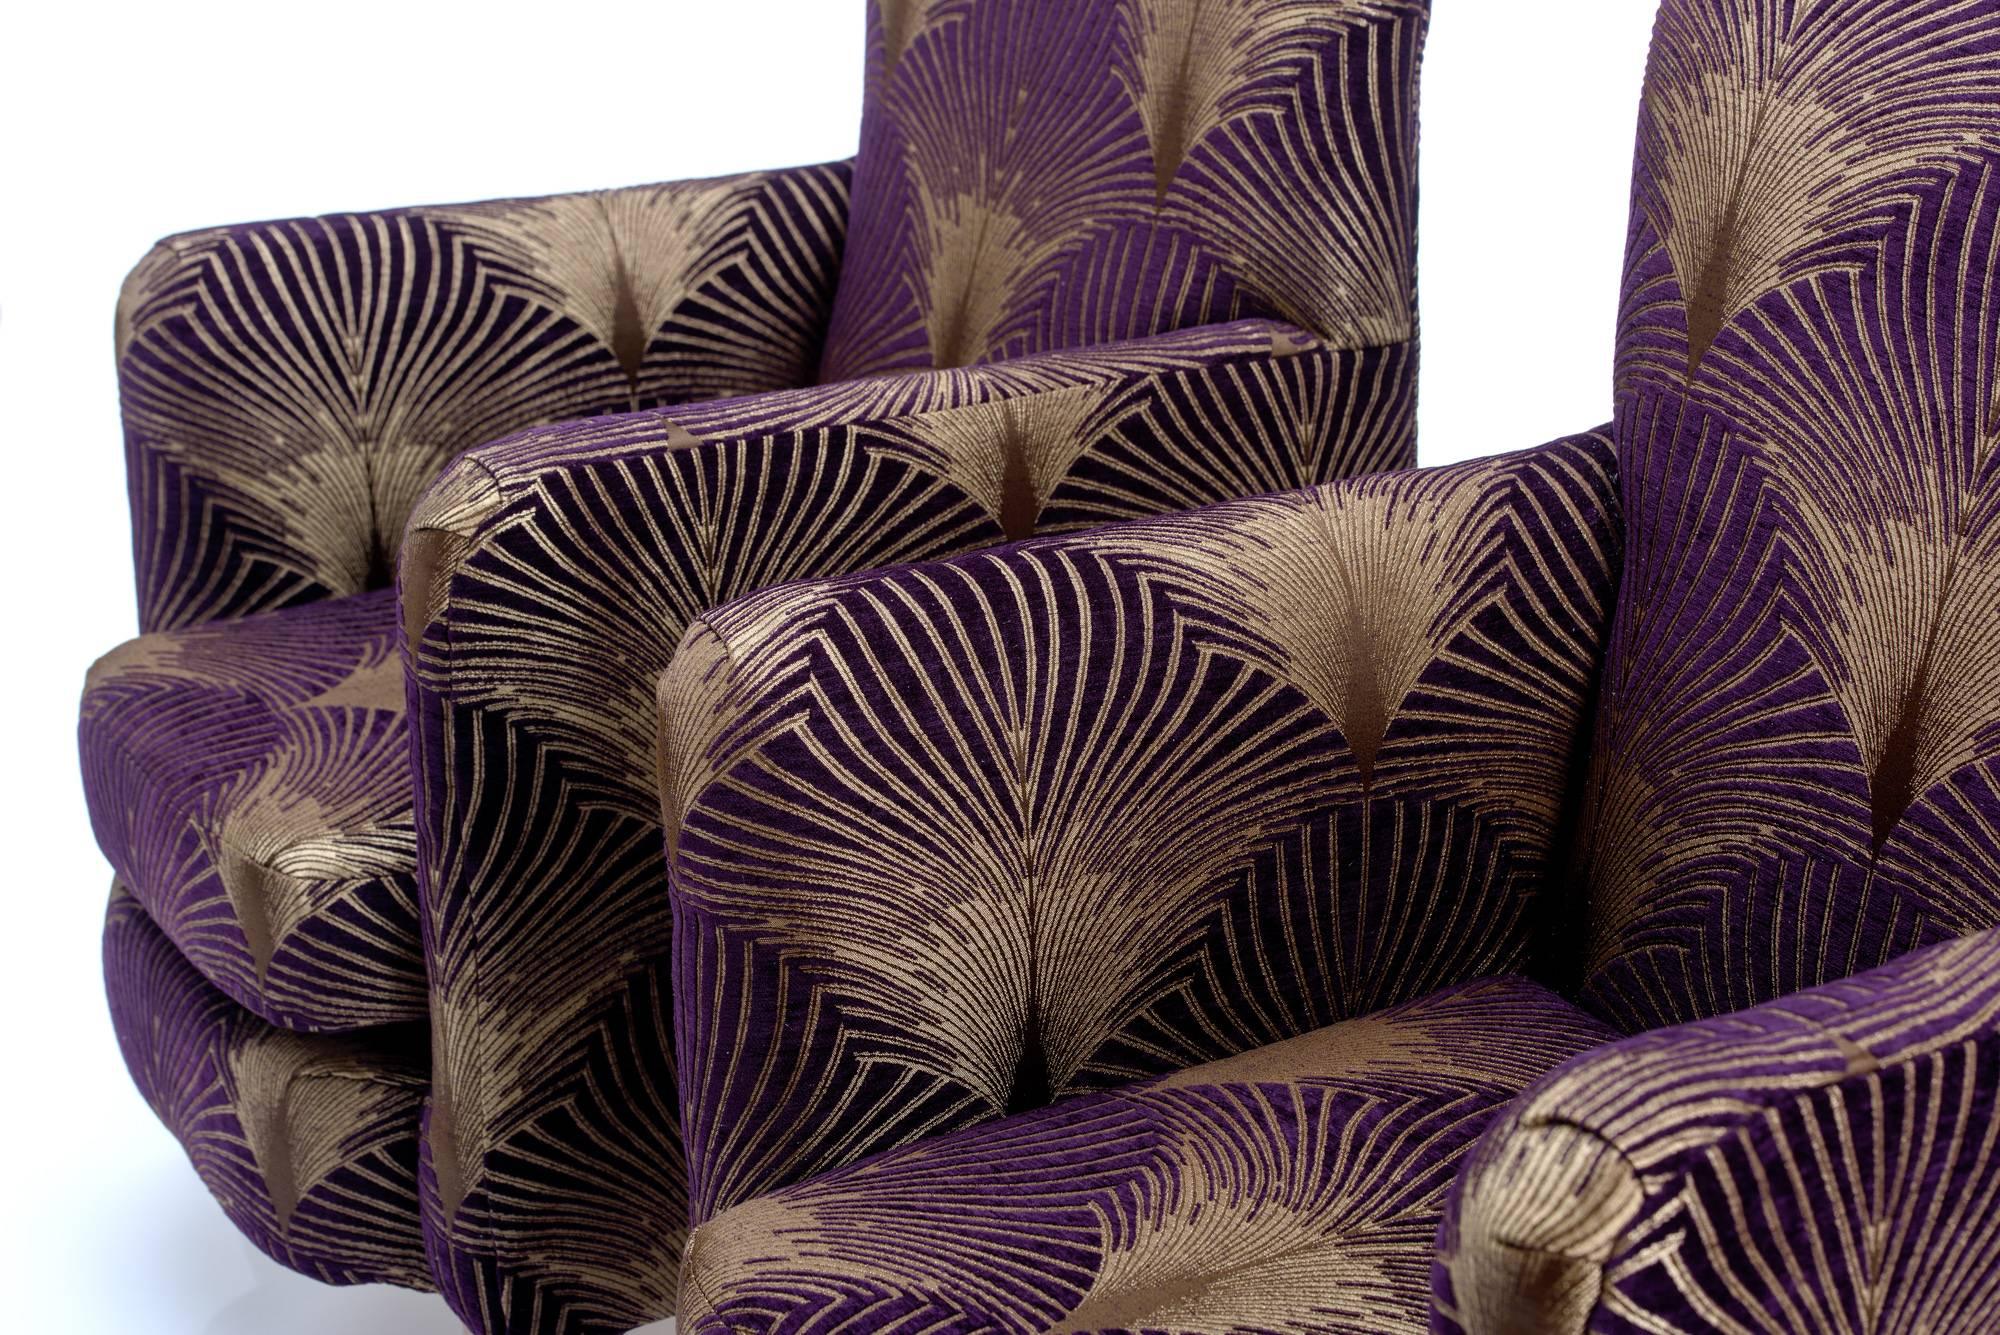 Delightful pair of unusual English Art Deco style armchairs reupholstered in gorgeous aubergine gilded fan fabric.

Resting on original restored square oak legs. 